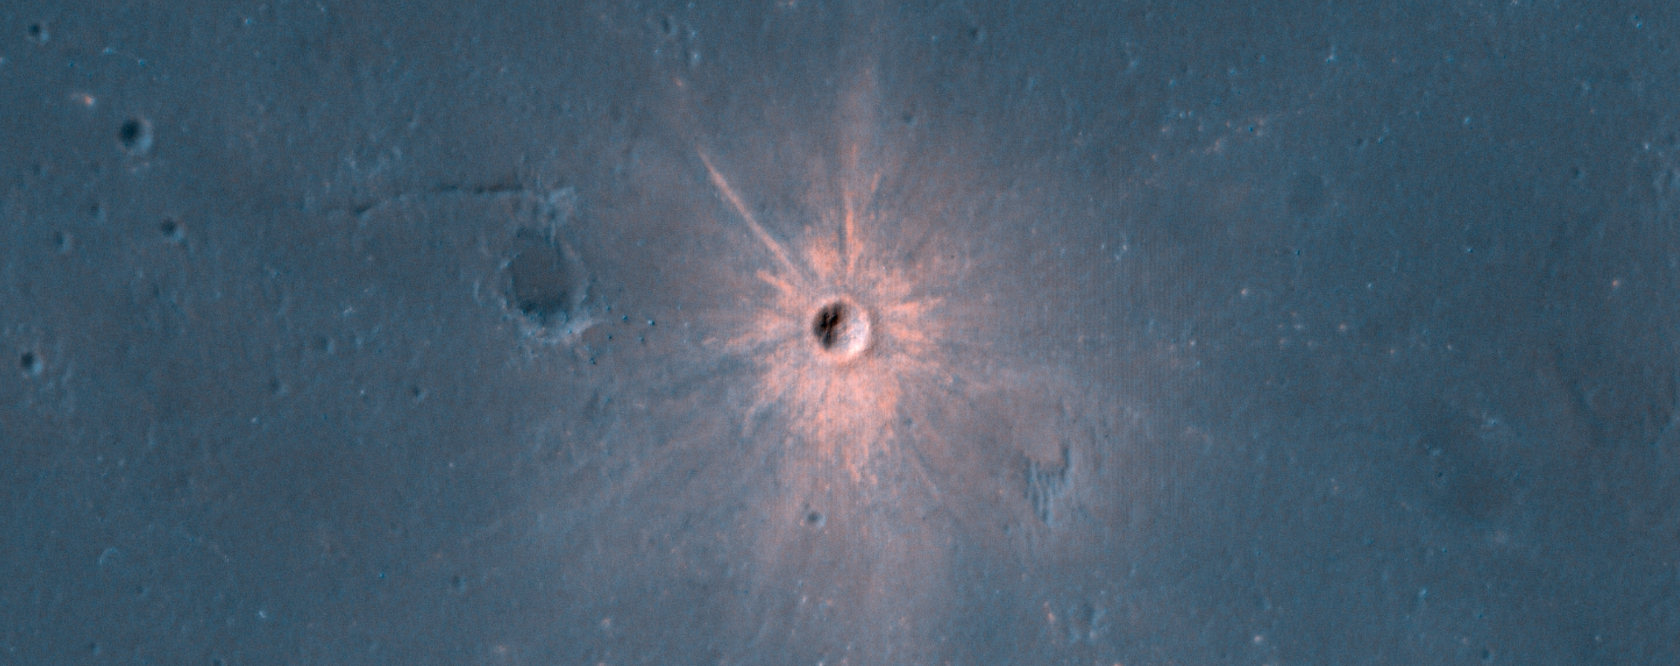 A New Impact Crater with Bright Ejecta